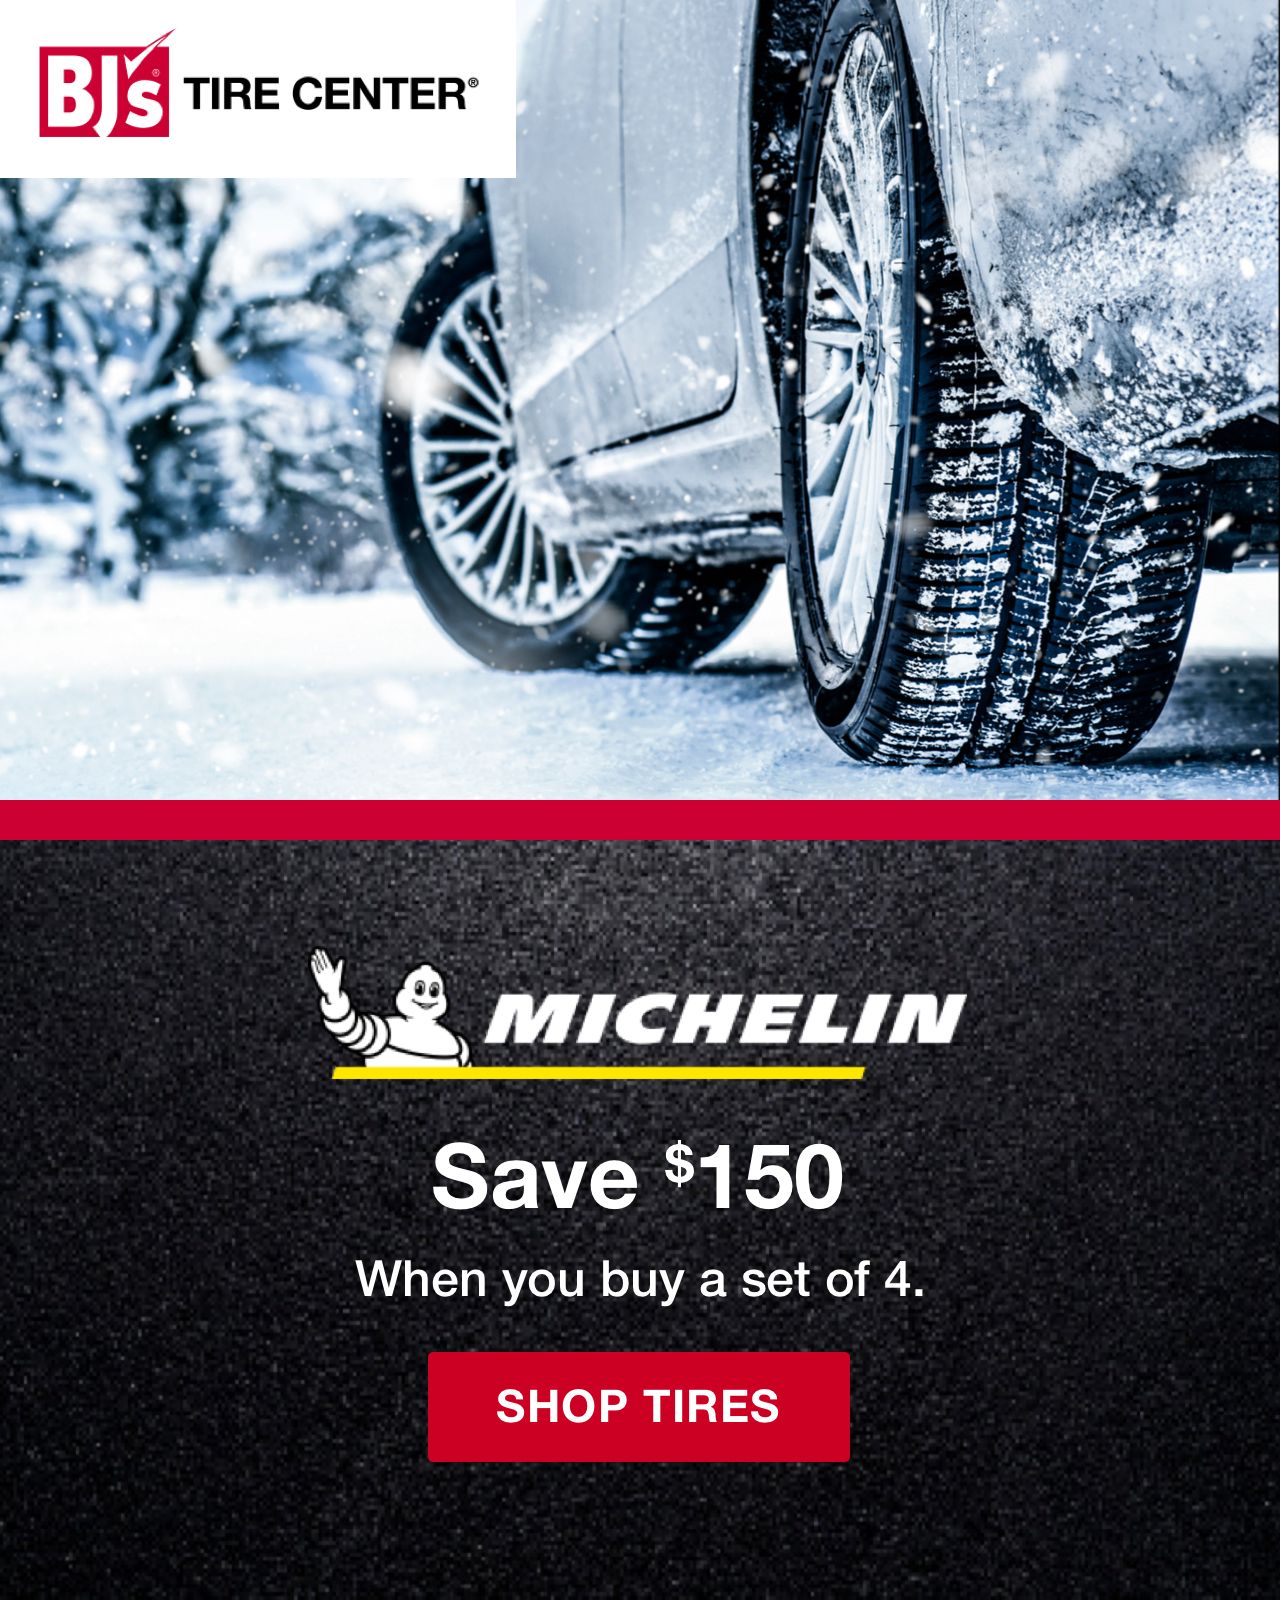 BJ's Tire Center. Save $150 on Michelin tires when you buy a set of 4. Click to shop tires.